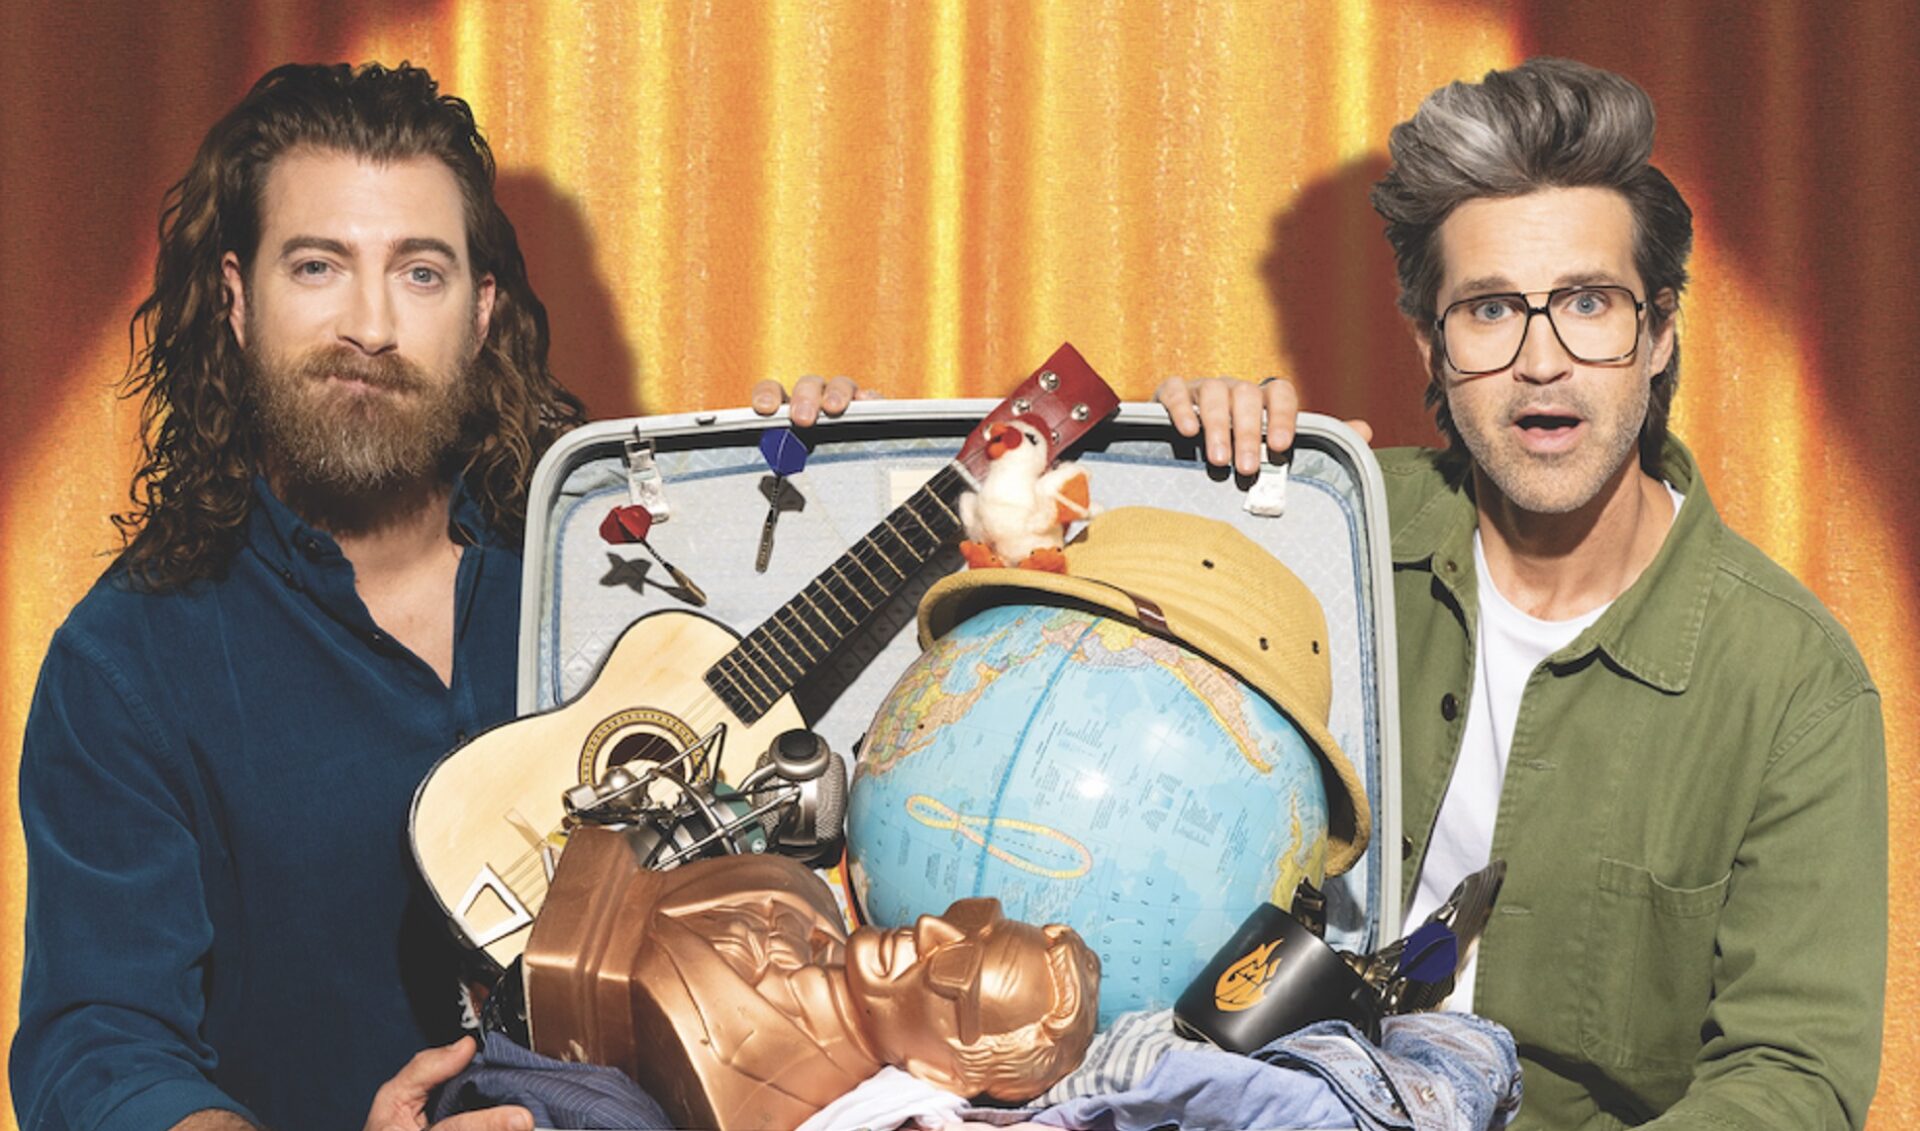 Rhett & Link are ready for their first Mythical tour